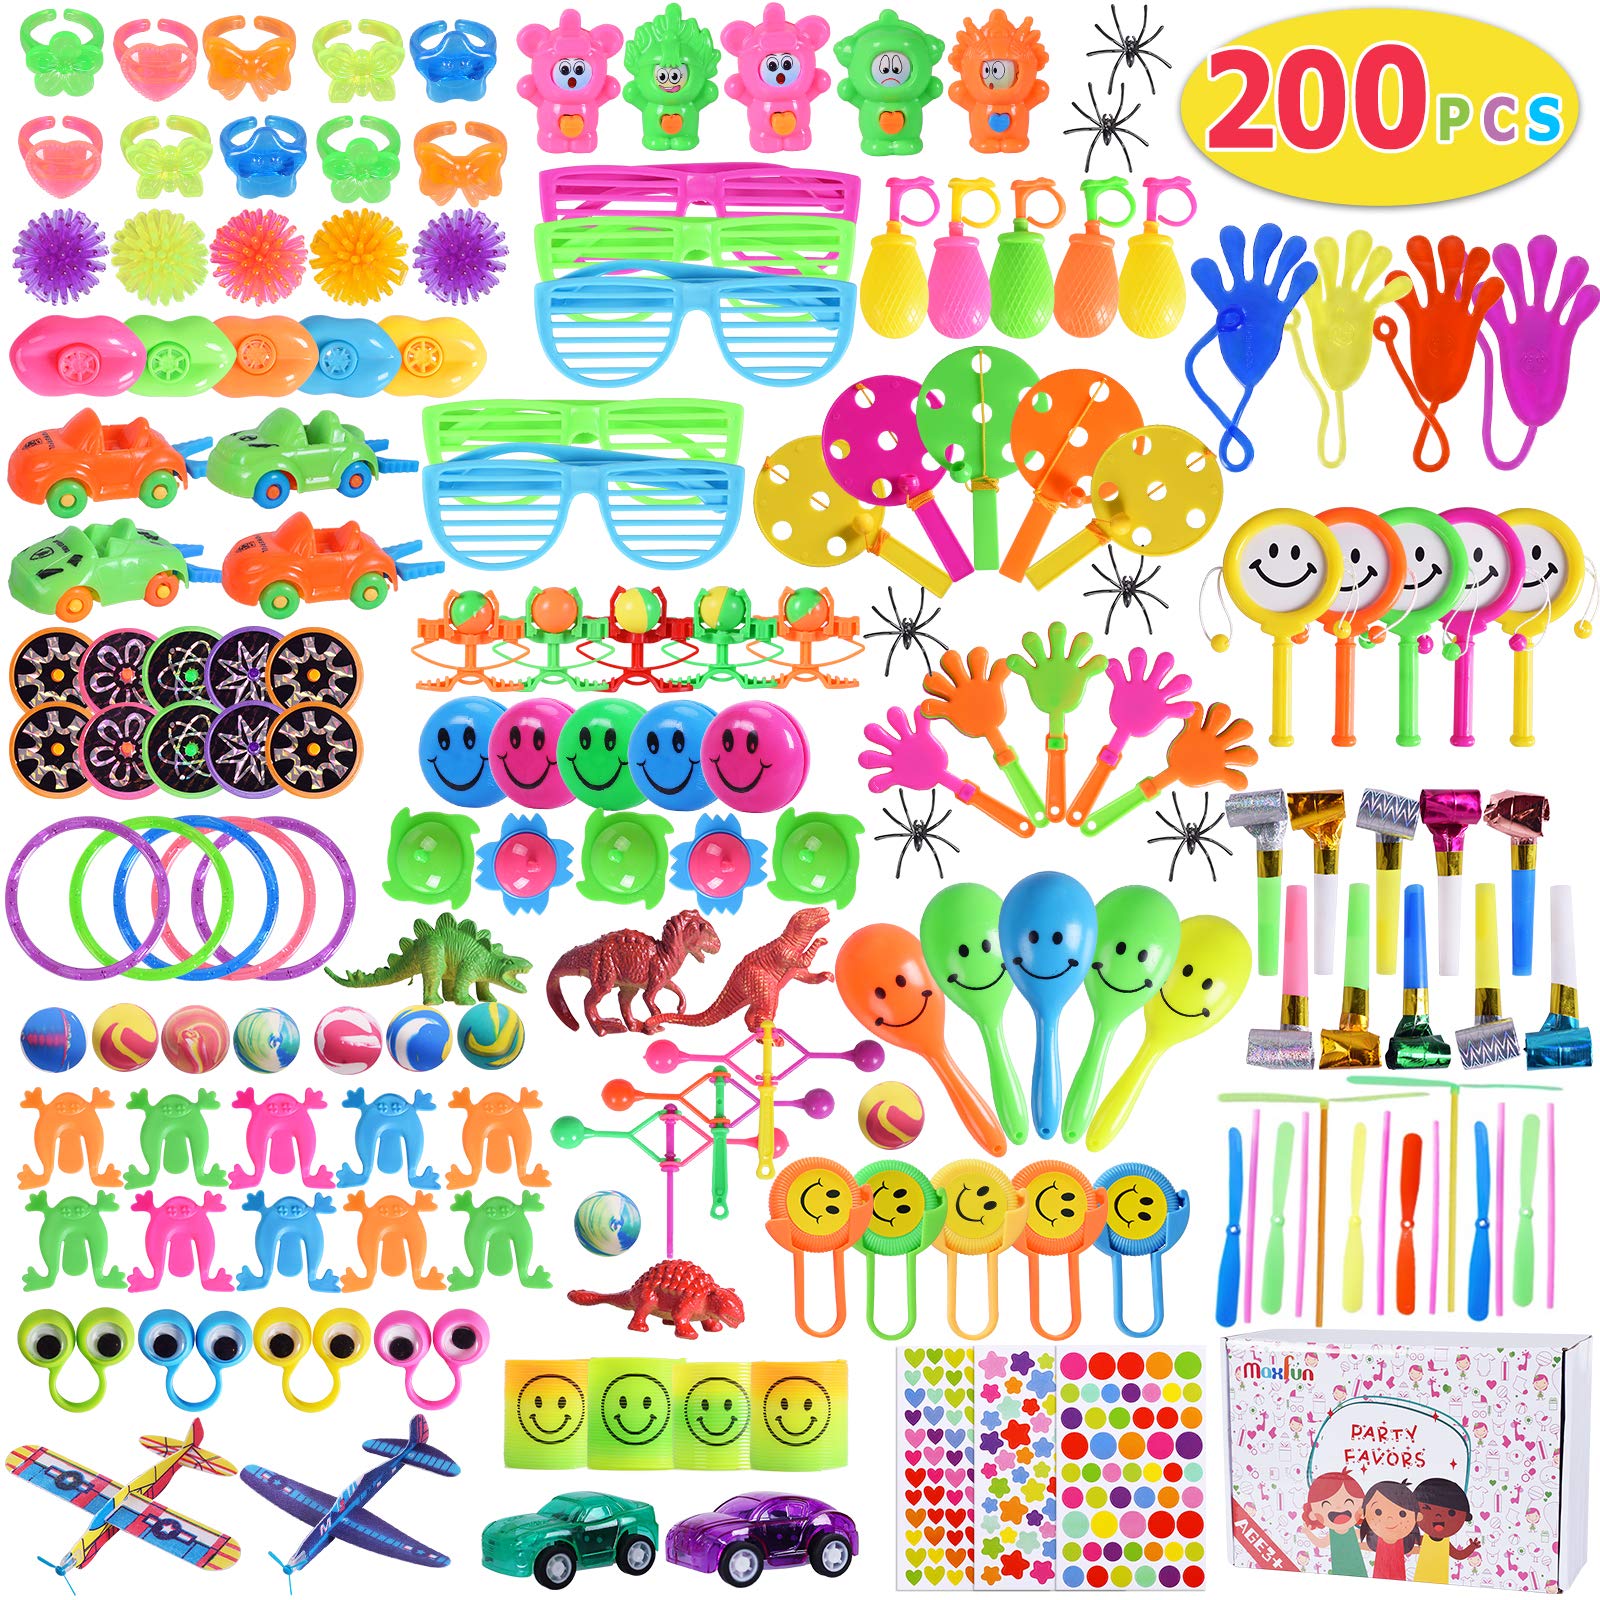 Max Fun 200Pcs Party Toys Assortment Party Favors for Kids Birthday Carnival Prizes Box Goodie Bag Fillers Classroom Rewards Pinata Filler Toys Treasure Box